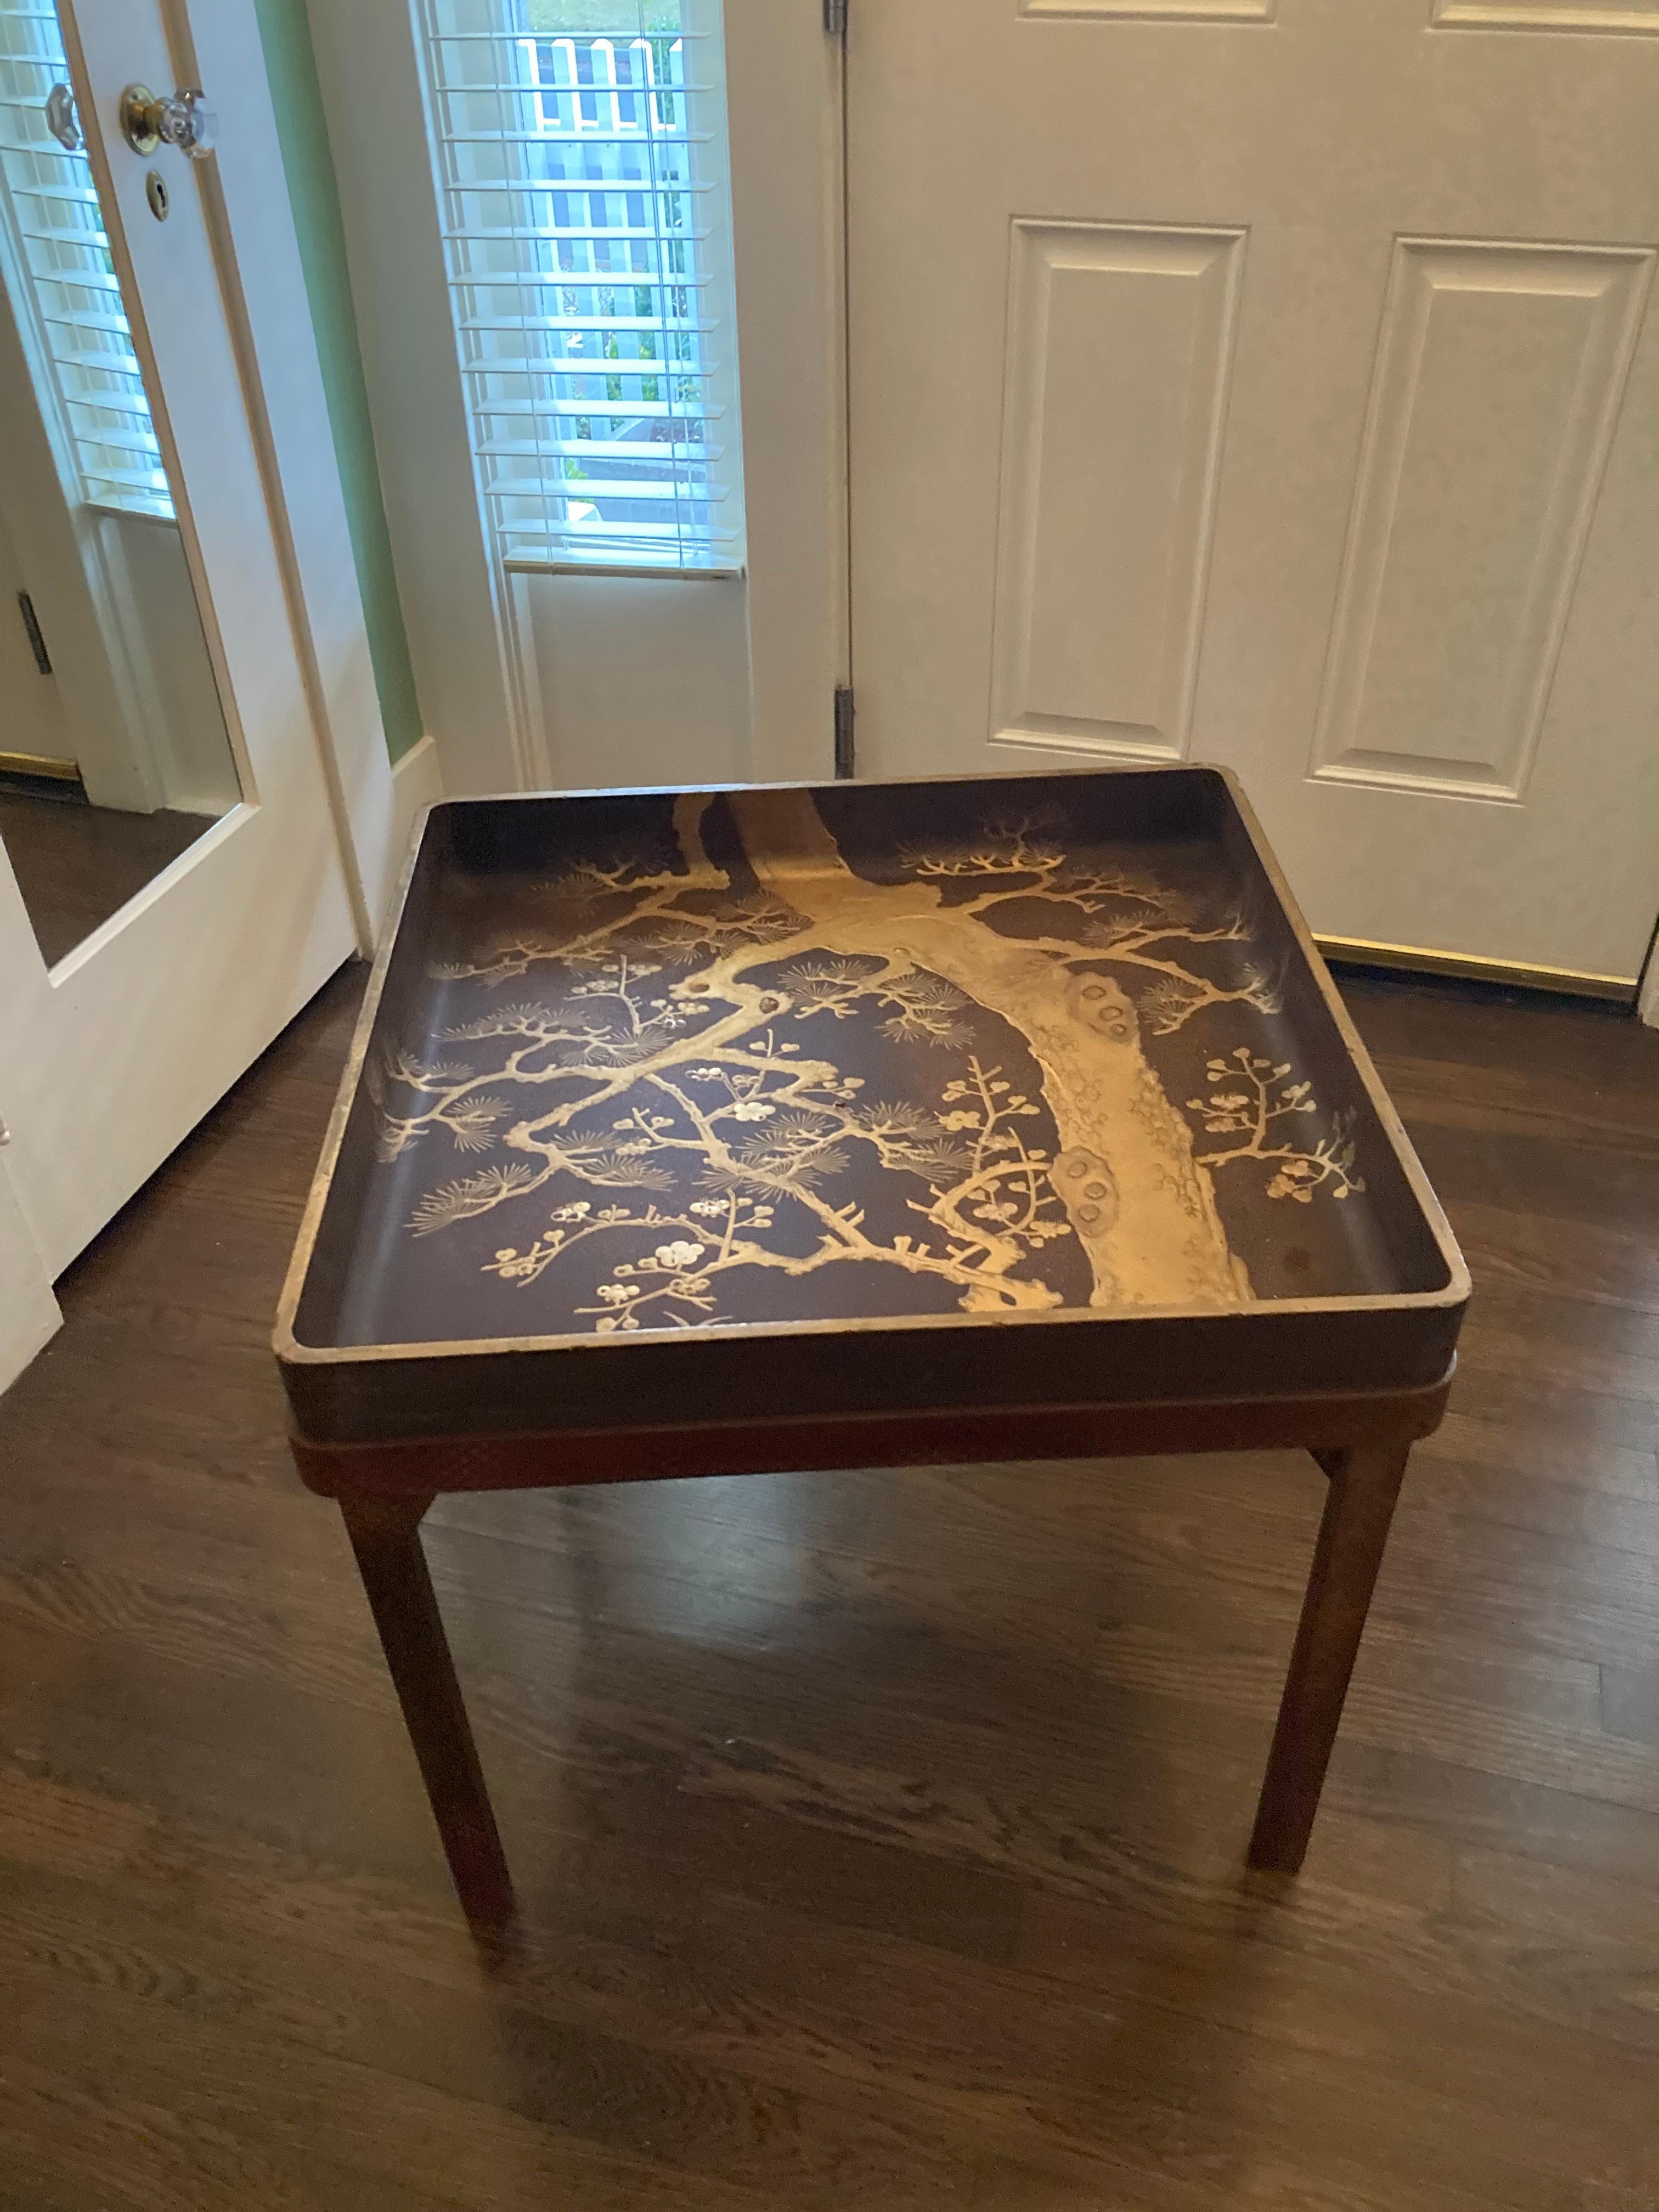 A early 20th century Japanese Lacquer tray table of a square shape sitting on a custom stand.